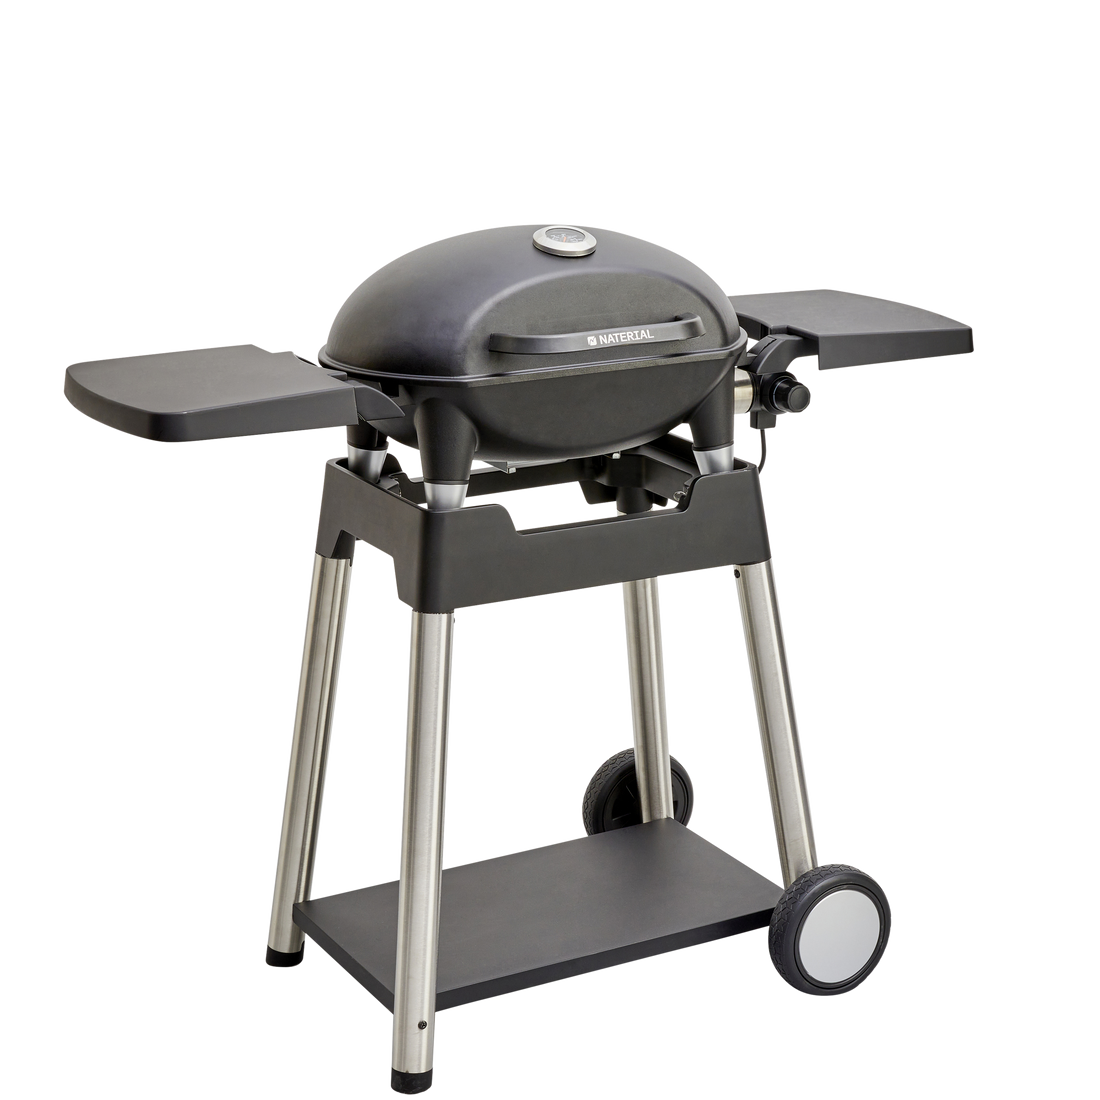 NATERIAL HYPERION 2200W ELECTRIC BBQ WITH TROLLEY - best price from Maltashopper.com BR500015368